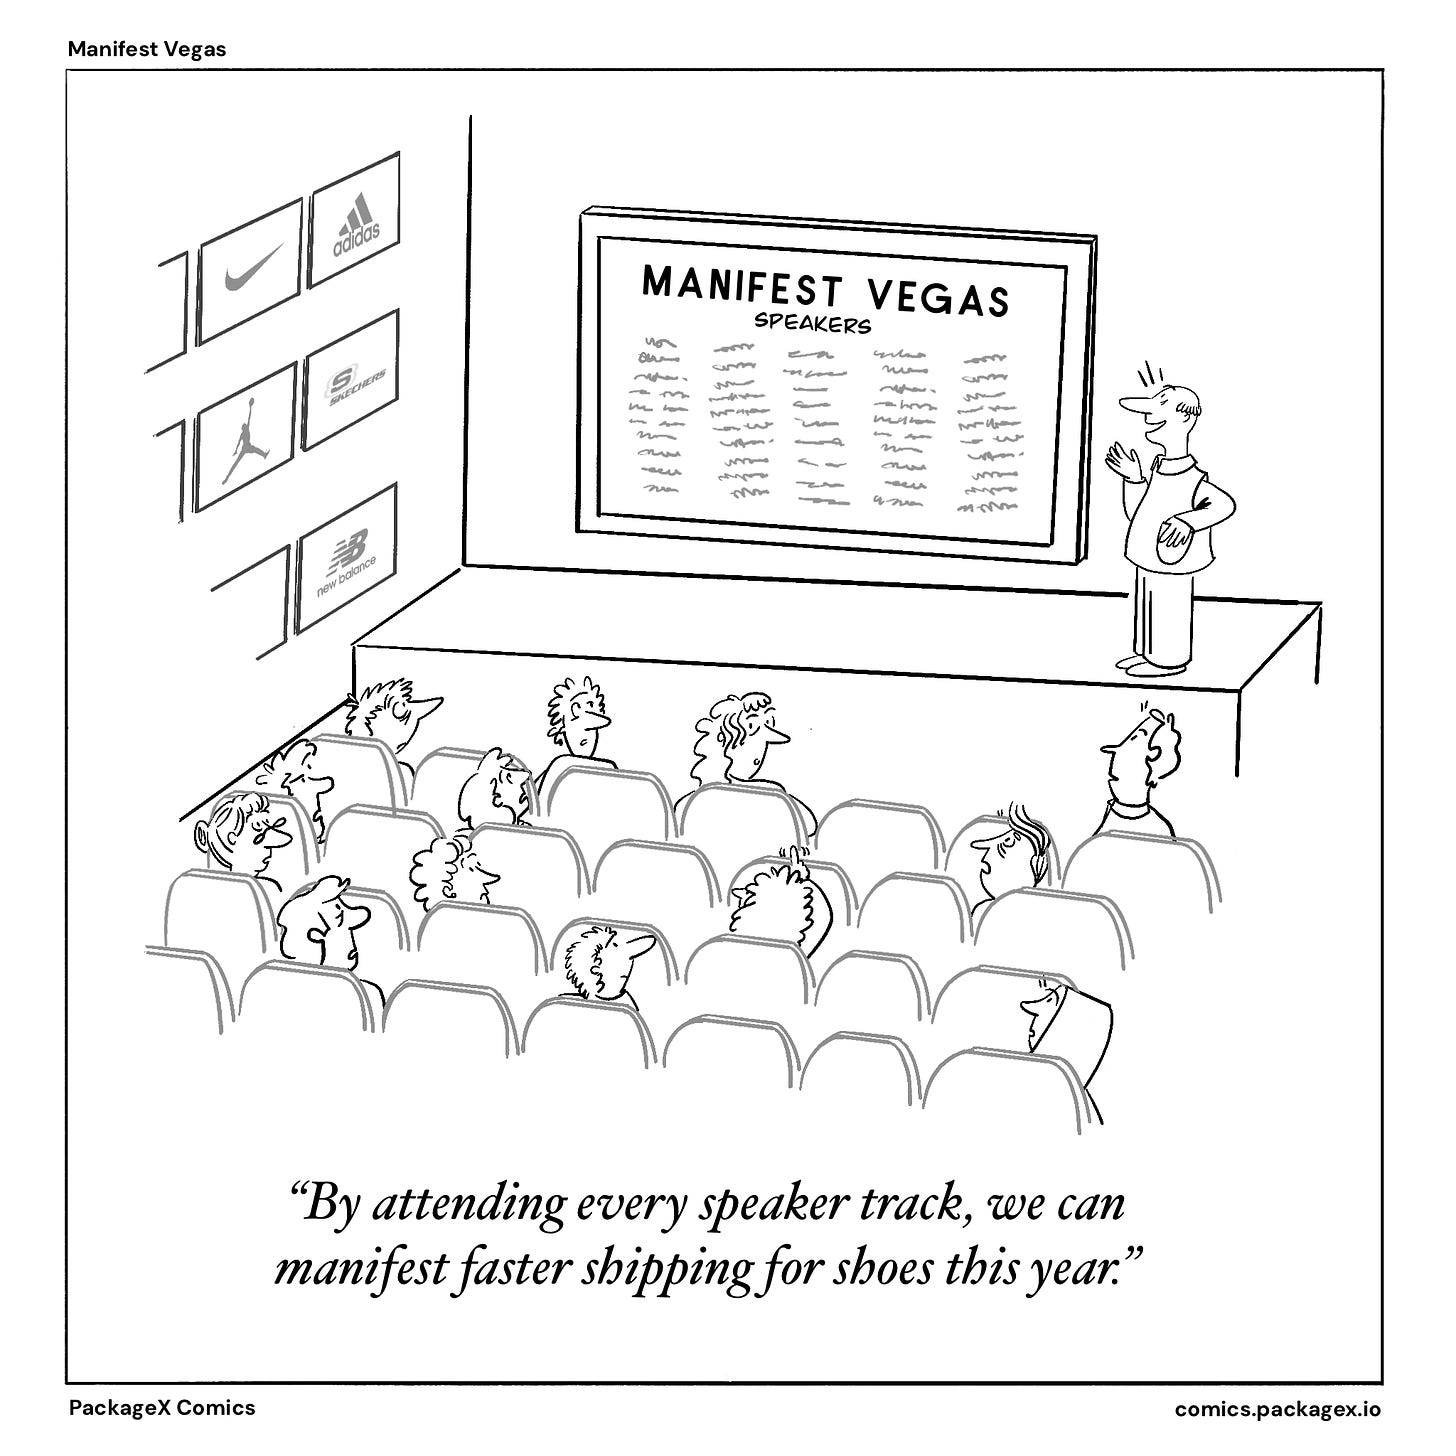 Cartoon about attending all the speaker tracks at Manifest Vegas, a logistics and supply chain trade show